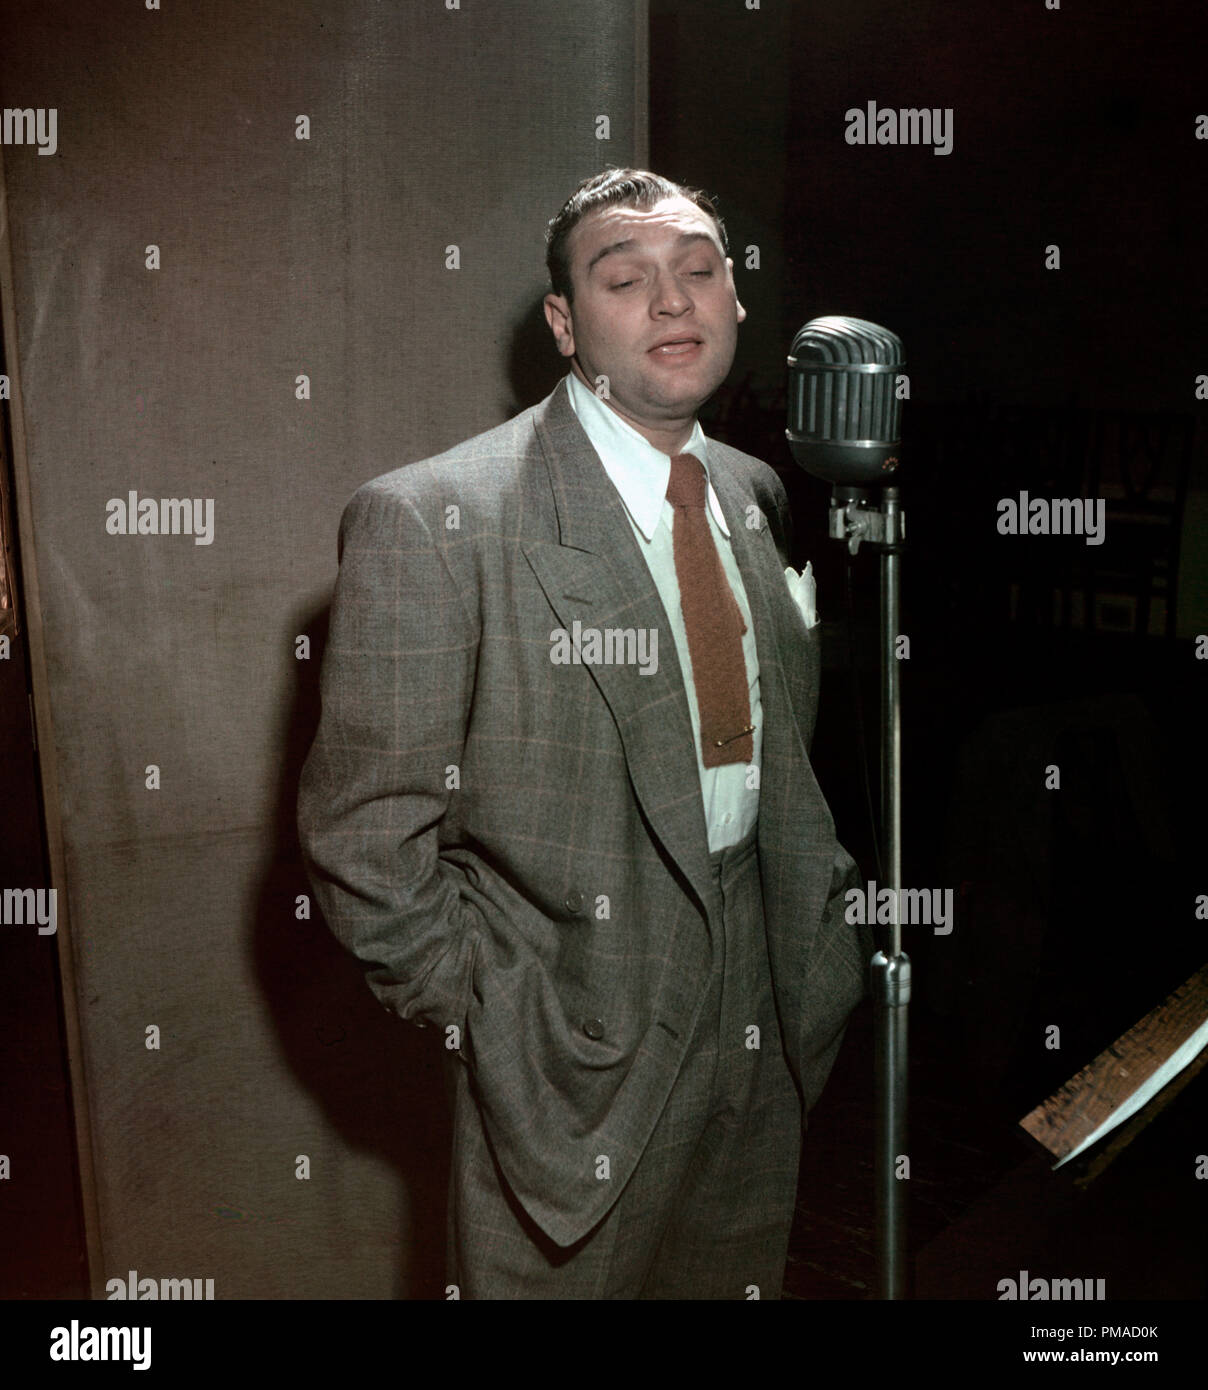 Portrait of Frankie Laine, New York, N.Y., between 1946 and 1948. Photo by: William P. Gottlieb File Reference # 32368 539THA Stock Photo